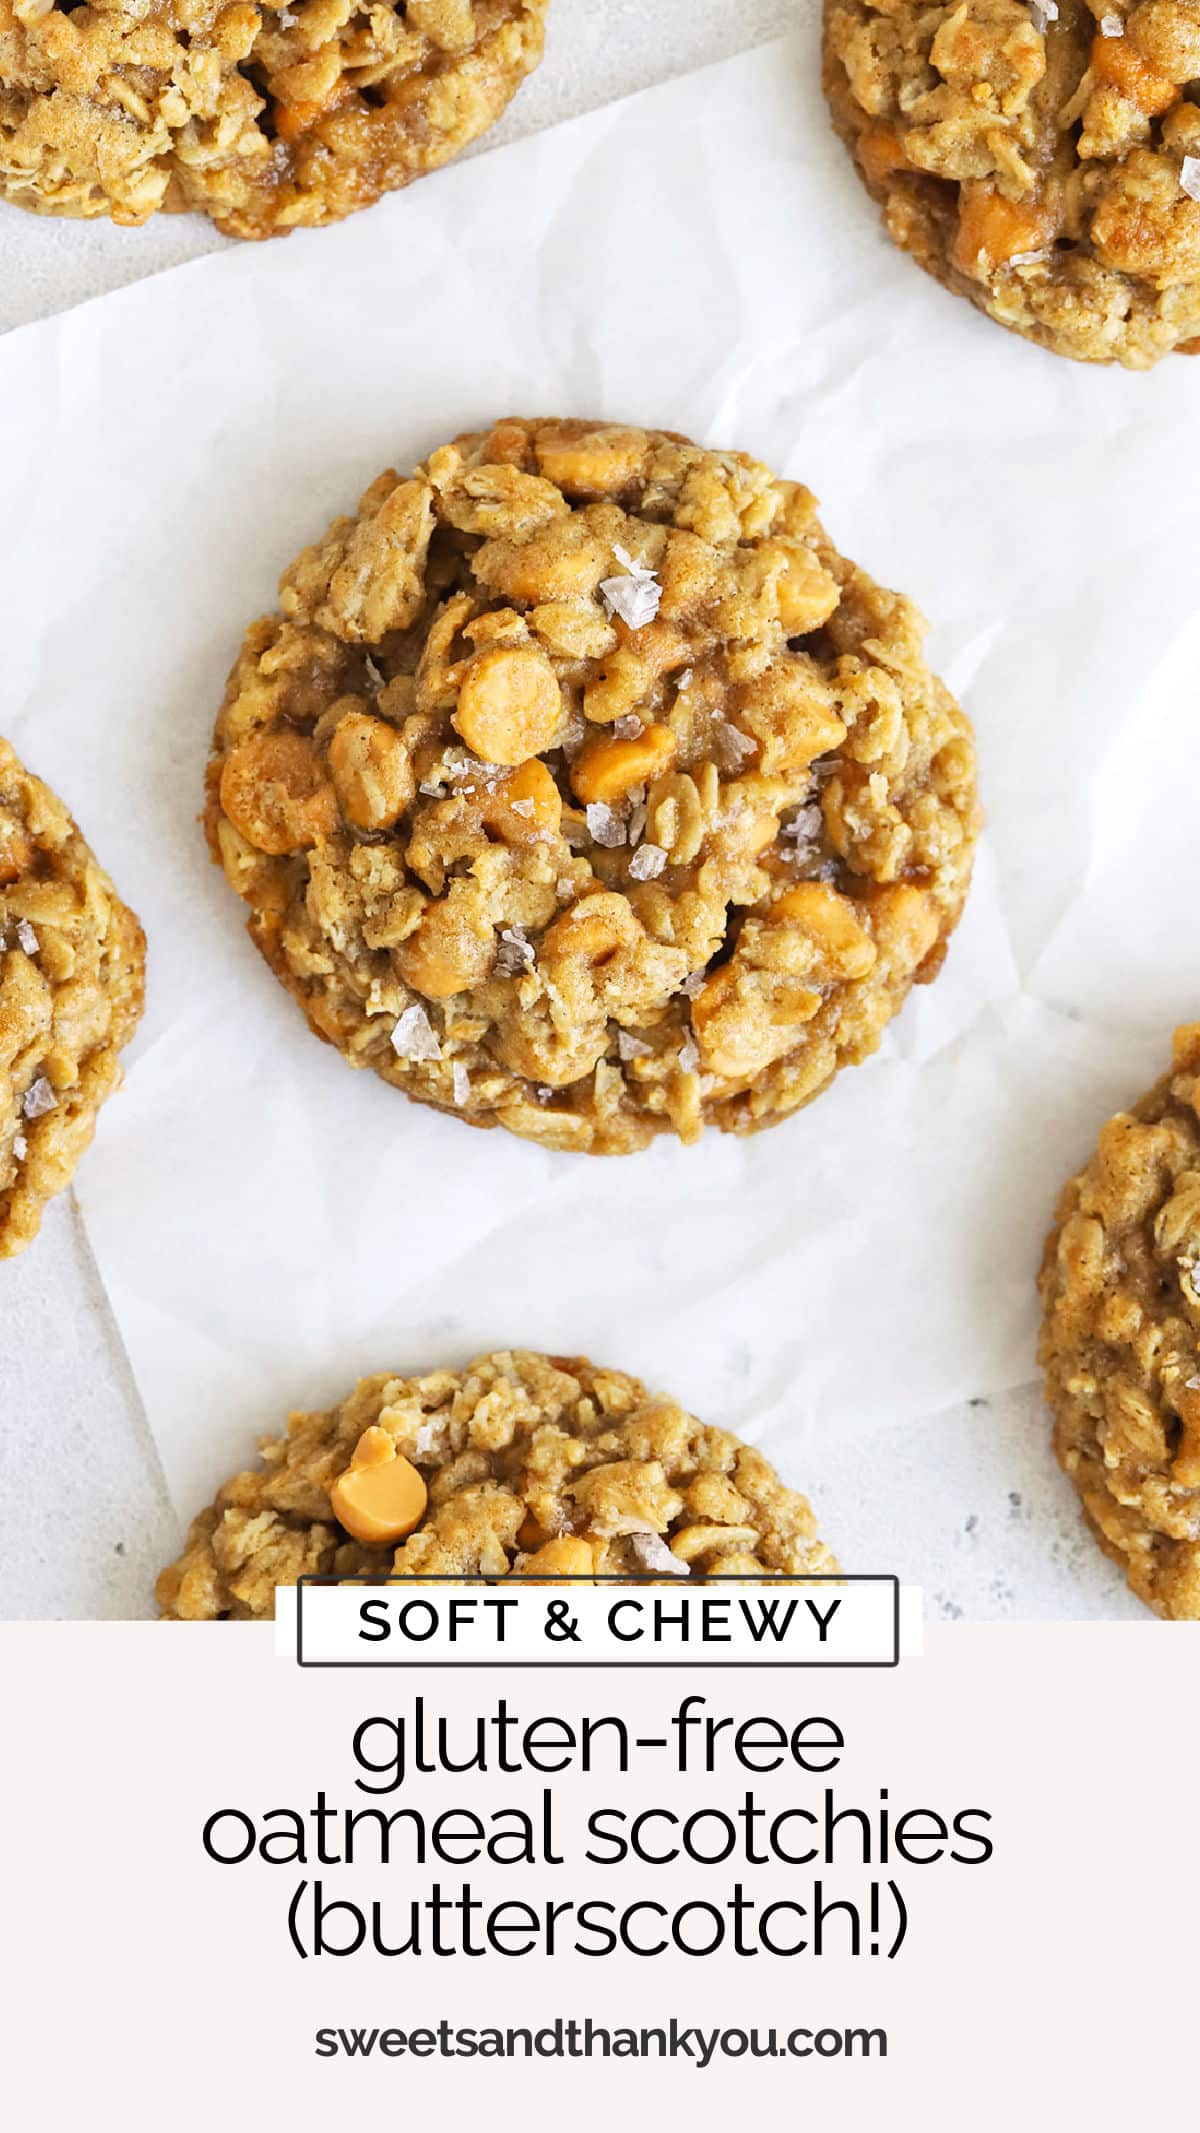 Gluten-Free Oatmeal Butterscotch Cookies - Easy, chewy gluten-free oatmeal scotchies cookies are loaded with flavor & have the best texture! // the best oatmeal scotchies recipe // gluten-free oatmeal cookies recipe // chewy oatmeal cookies // gluten free cookies // butterscotch cookies // gluten free butterscotch cookies //